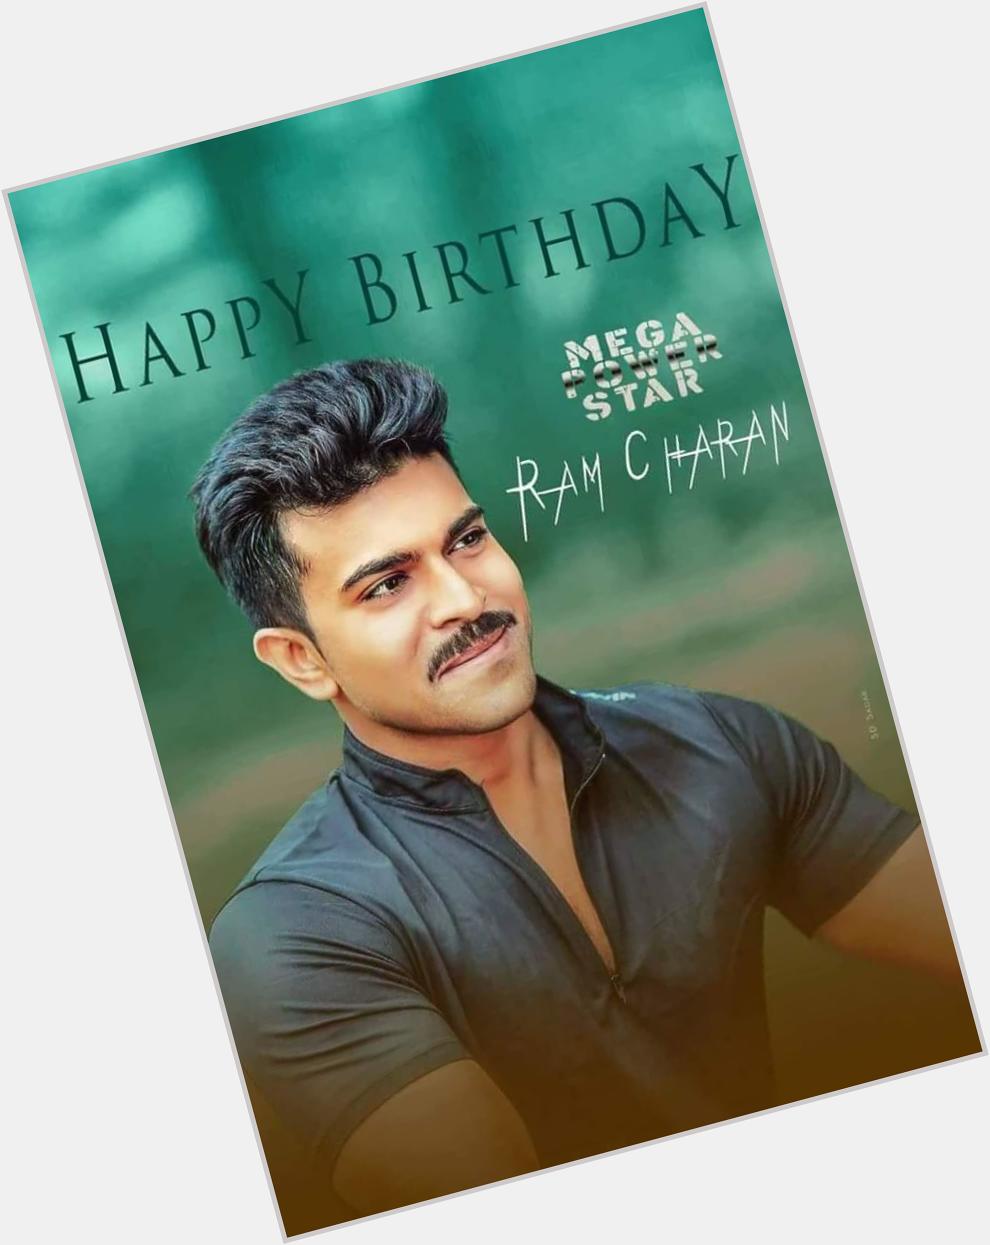 Happy Birthday MegaPowerstar Ram Charan . Most sensible actor from our Mega legacy. 